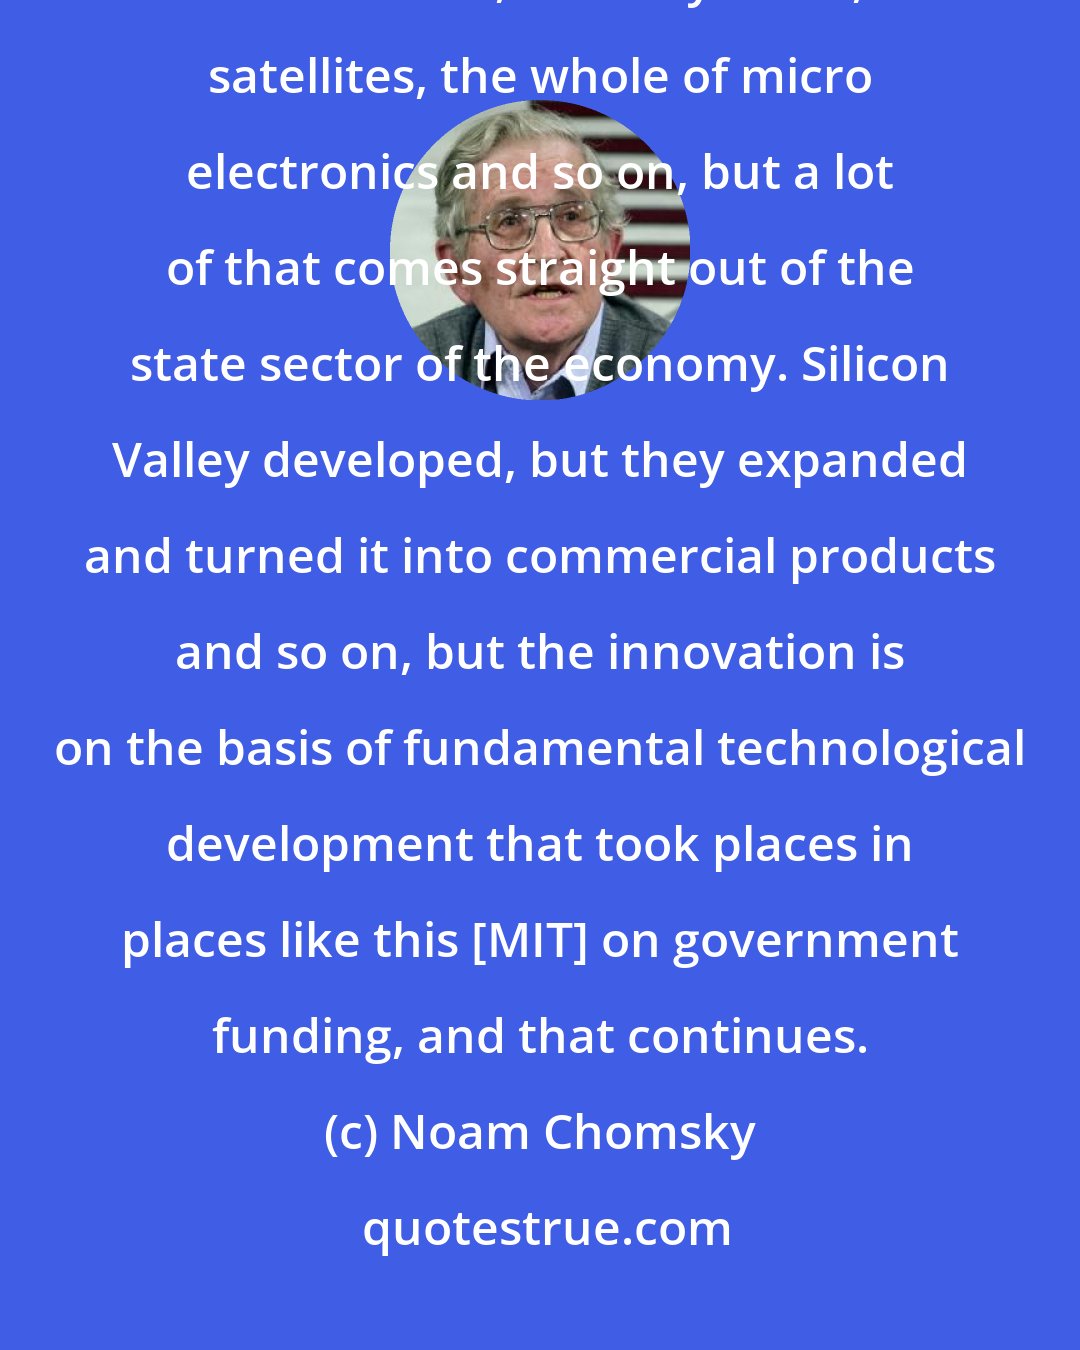 Noam Chomsky: Silicon Valley, after all, feeds off the existence of computers, the internet, the IT systems, satellites, the whole of micro electronics and so on, but a lot of that comes straight out of the state sector of the economy. Silicon Valley developed, but they expanded and turned it into commercial products and so on, but the innovation is on the basis of fundamental technological development that took places in places like this [MIT] on government funding, and that continues.